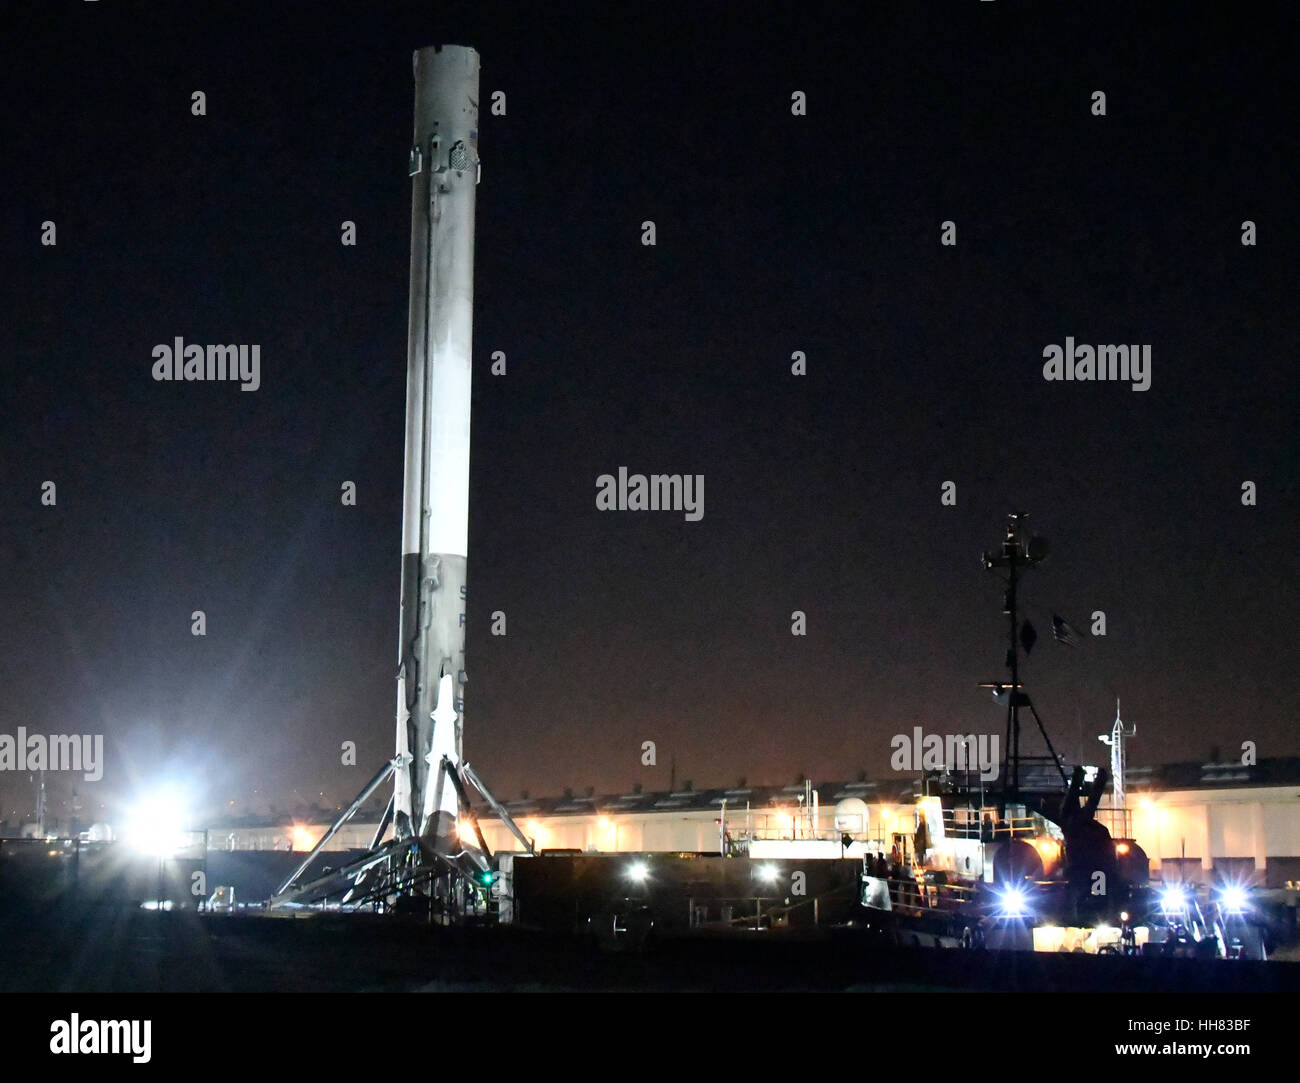 Los Angeles, USA. 17th Jan, 2017. SpaceX's Falcon 9 returns home in the port of Los Angeles. The falcon 9 rocket launched with 10 satellites for to low-Earth orbit for Iridium from Vandenberg Air Force Base, California. Credit: Gene Blevins/LA Daily news/ZumaPress Credit: Gene Blevins/ZUMA Wire/Alamy Live News Stock Photo